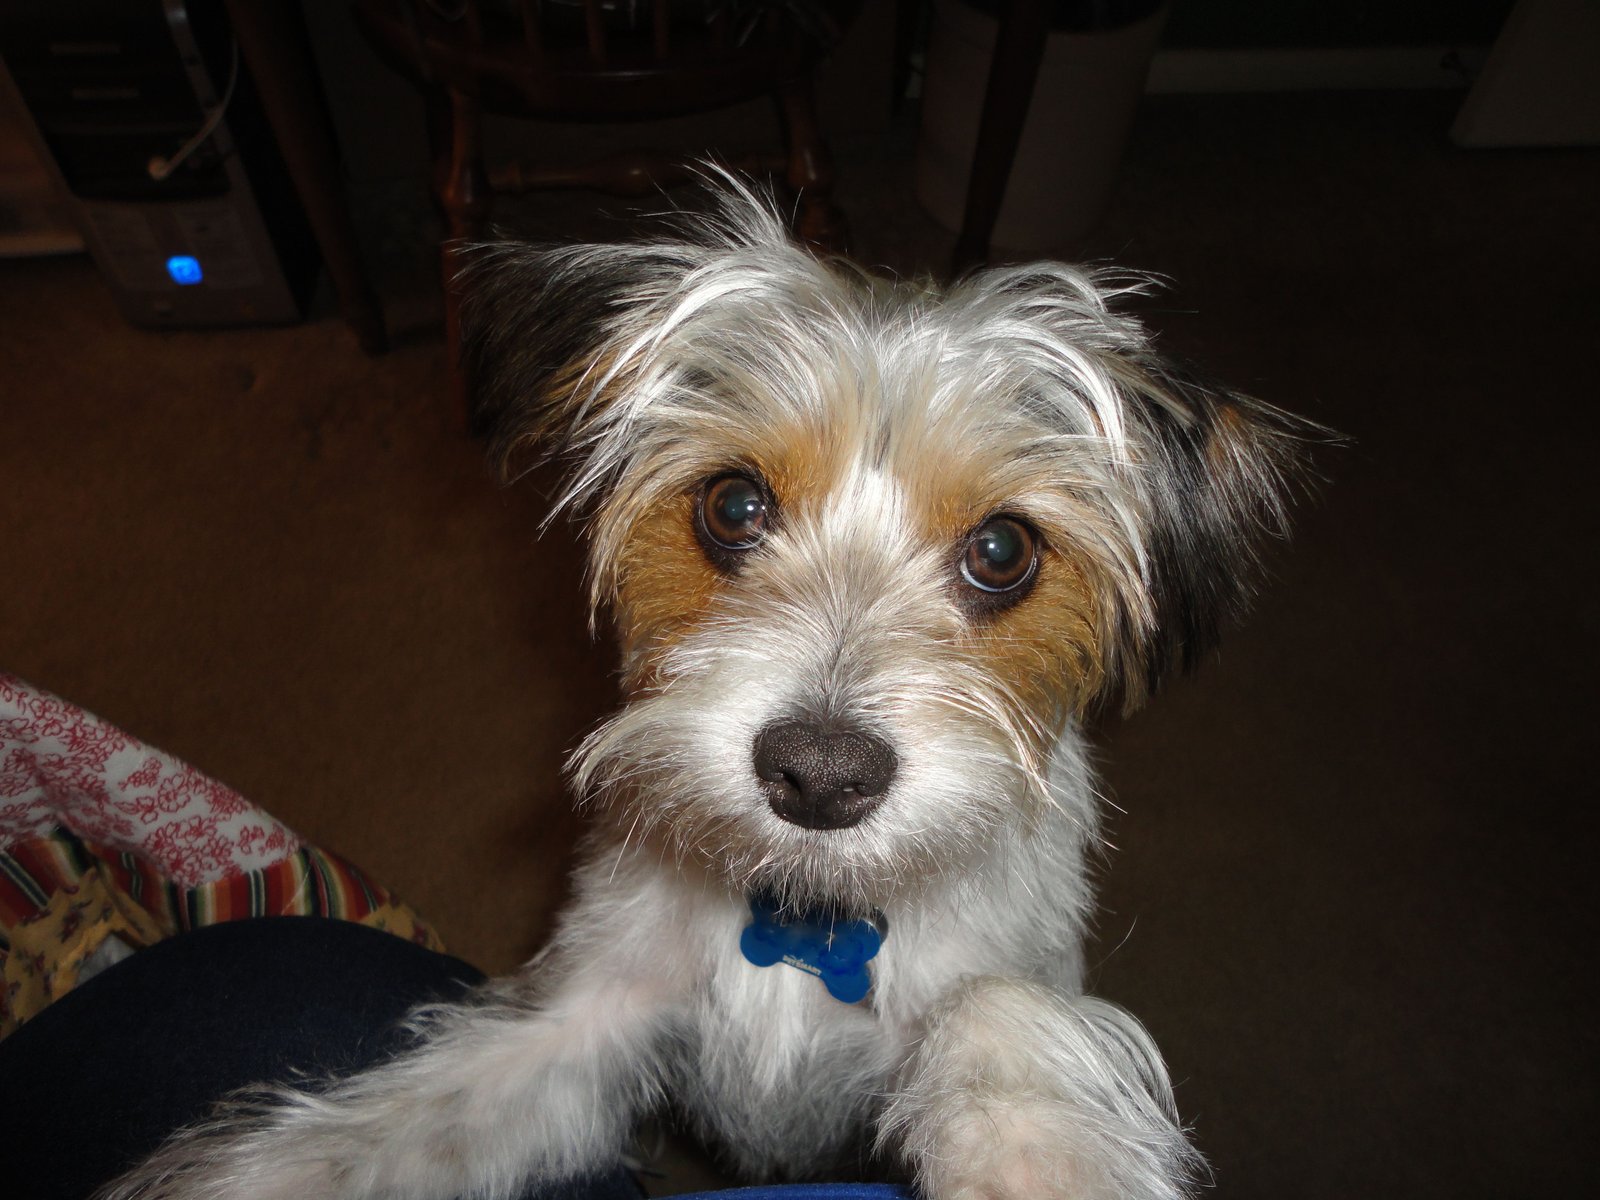 Jack Russell Mixed with Yorkie